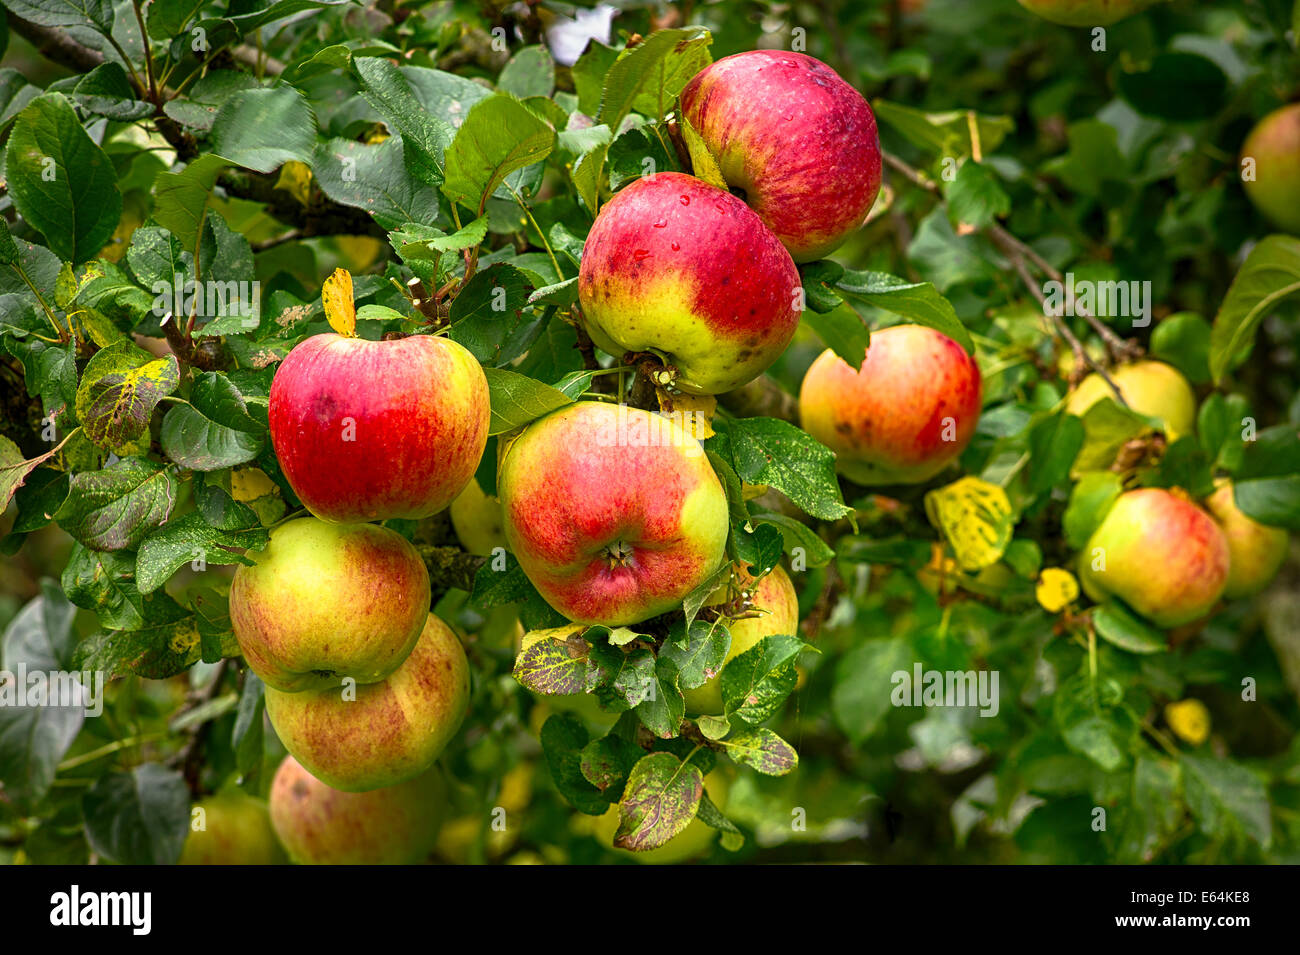 'Howgate Wonder' cooking apples ripe for picking Stock Photo